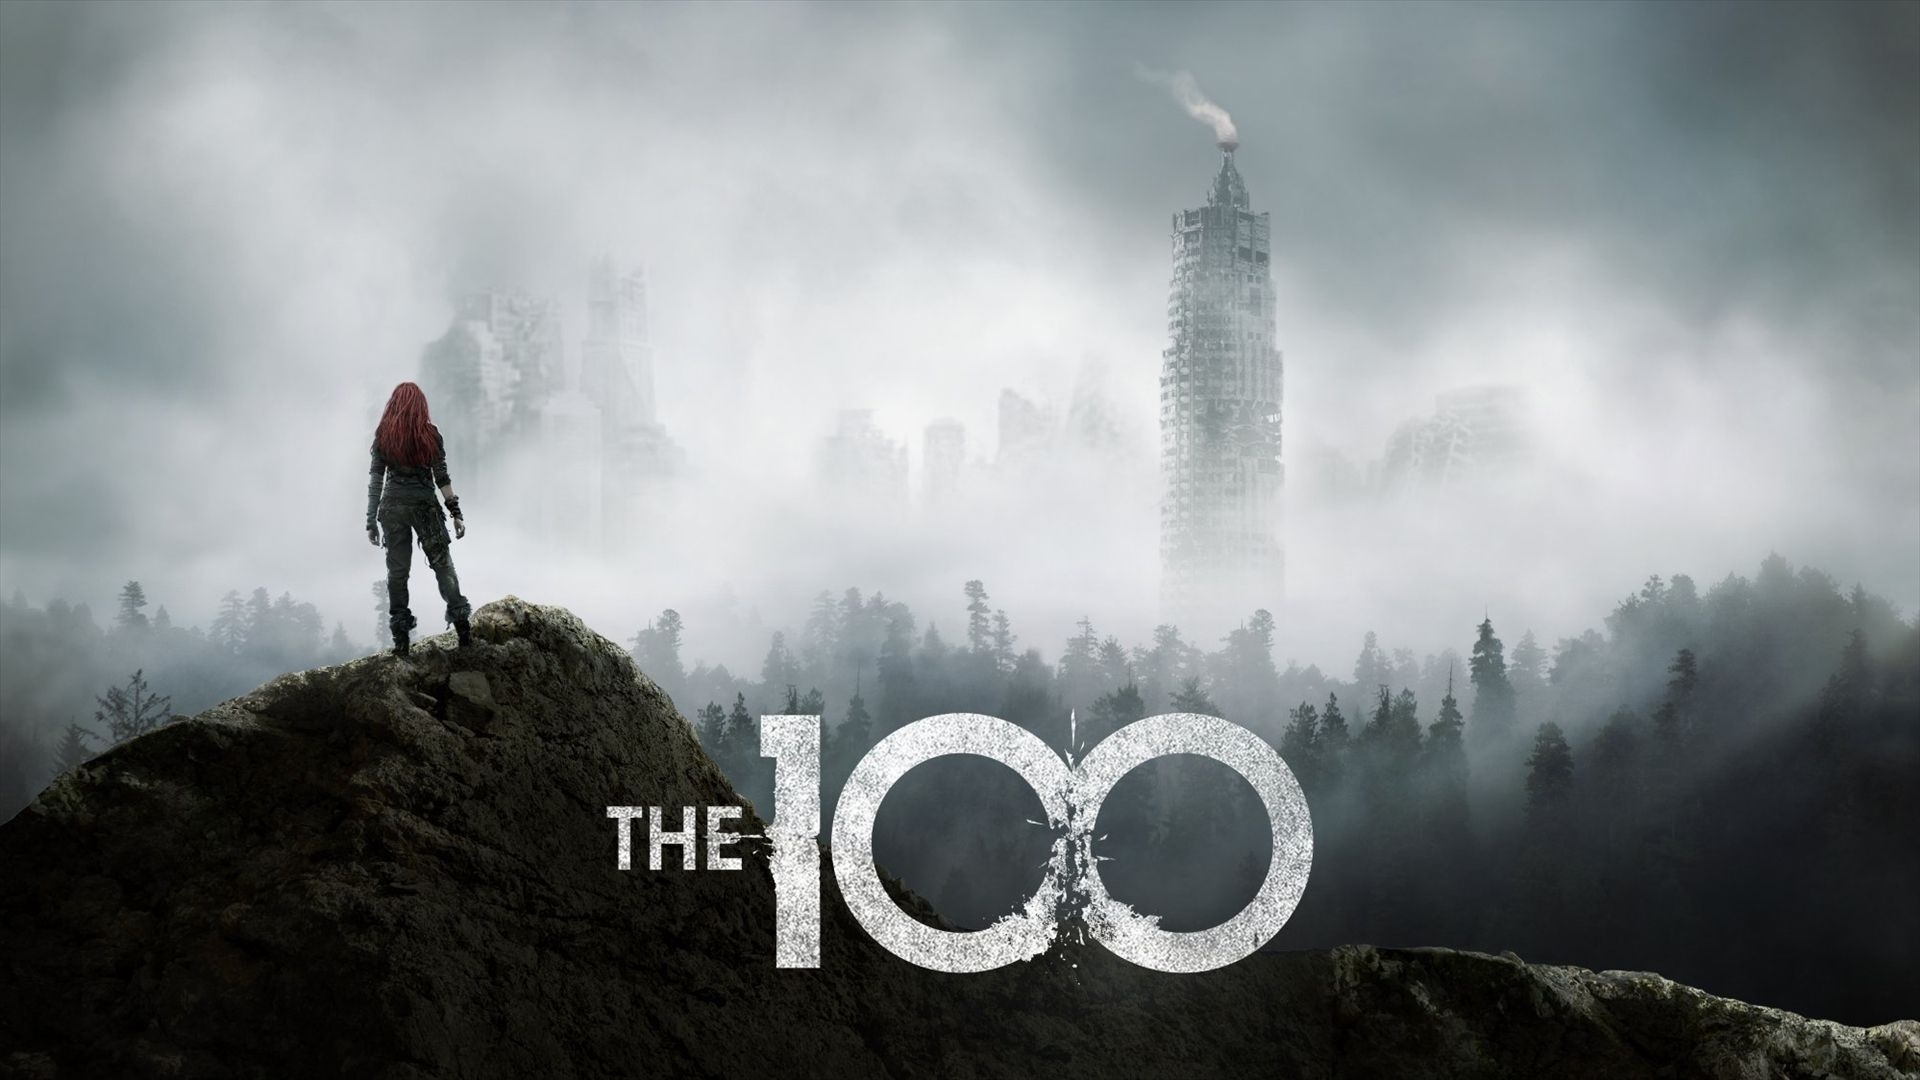 The 100, Wallpapers, Top Free, Backgrounds, 1920x1080 Full HD Desktop